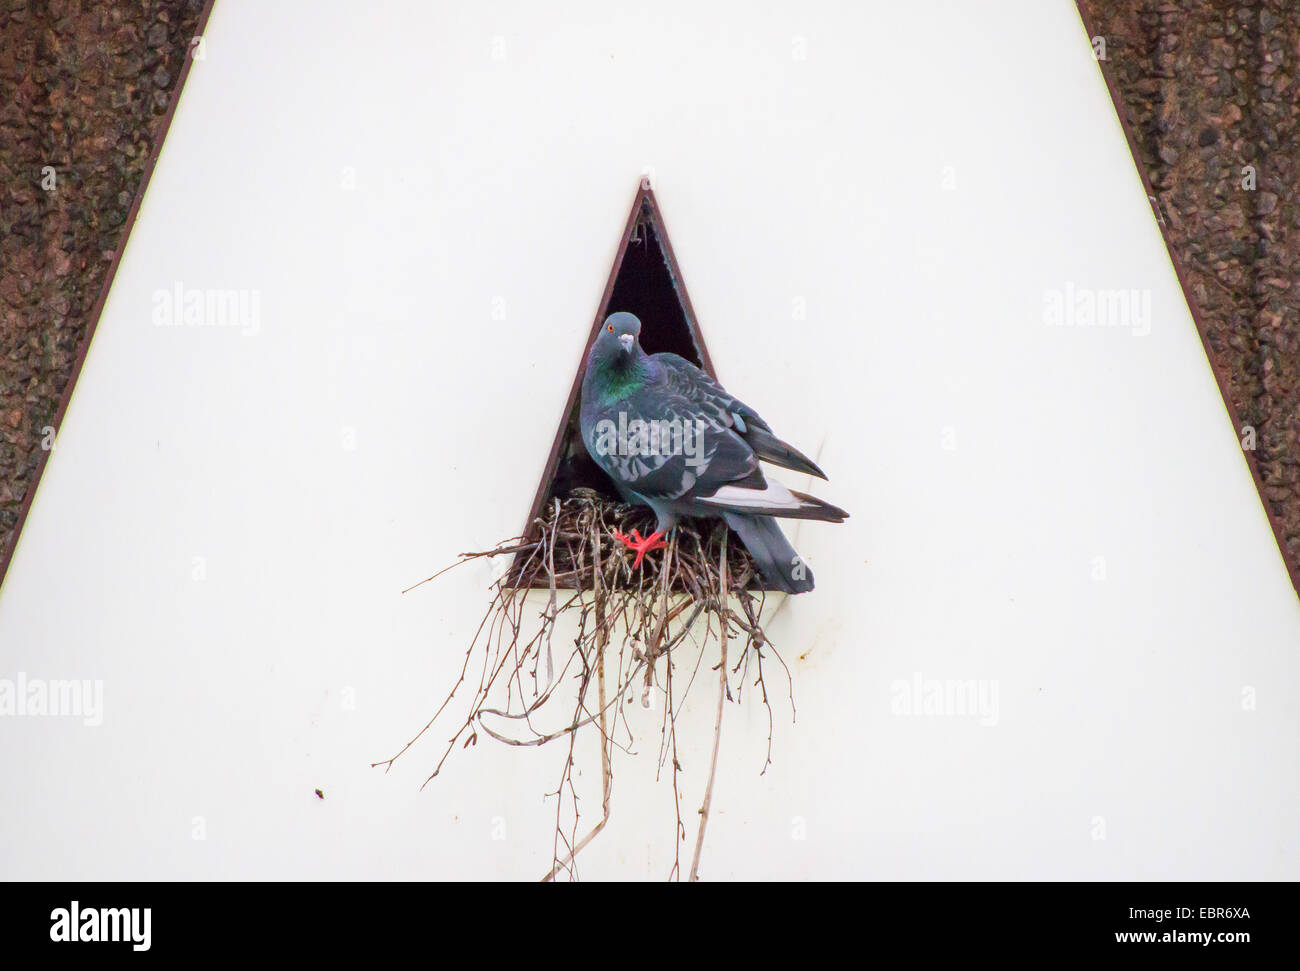 domestic pigeon (Columba livia f. domestica), pigeon nesting in a letter of a writing, Germany Stock Photo